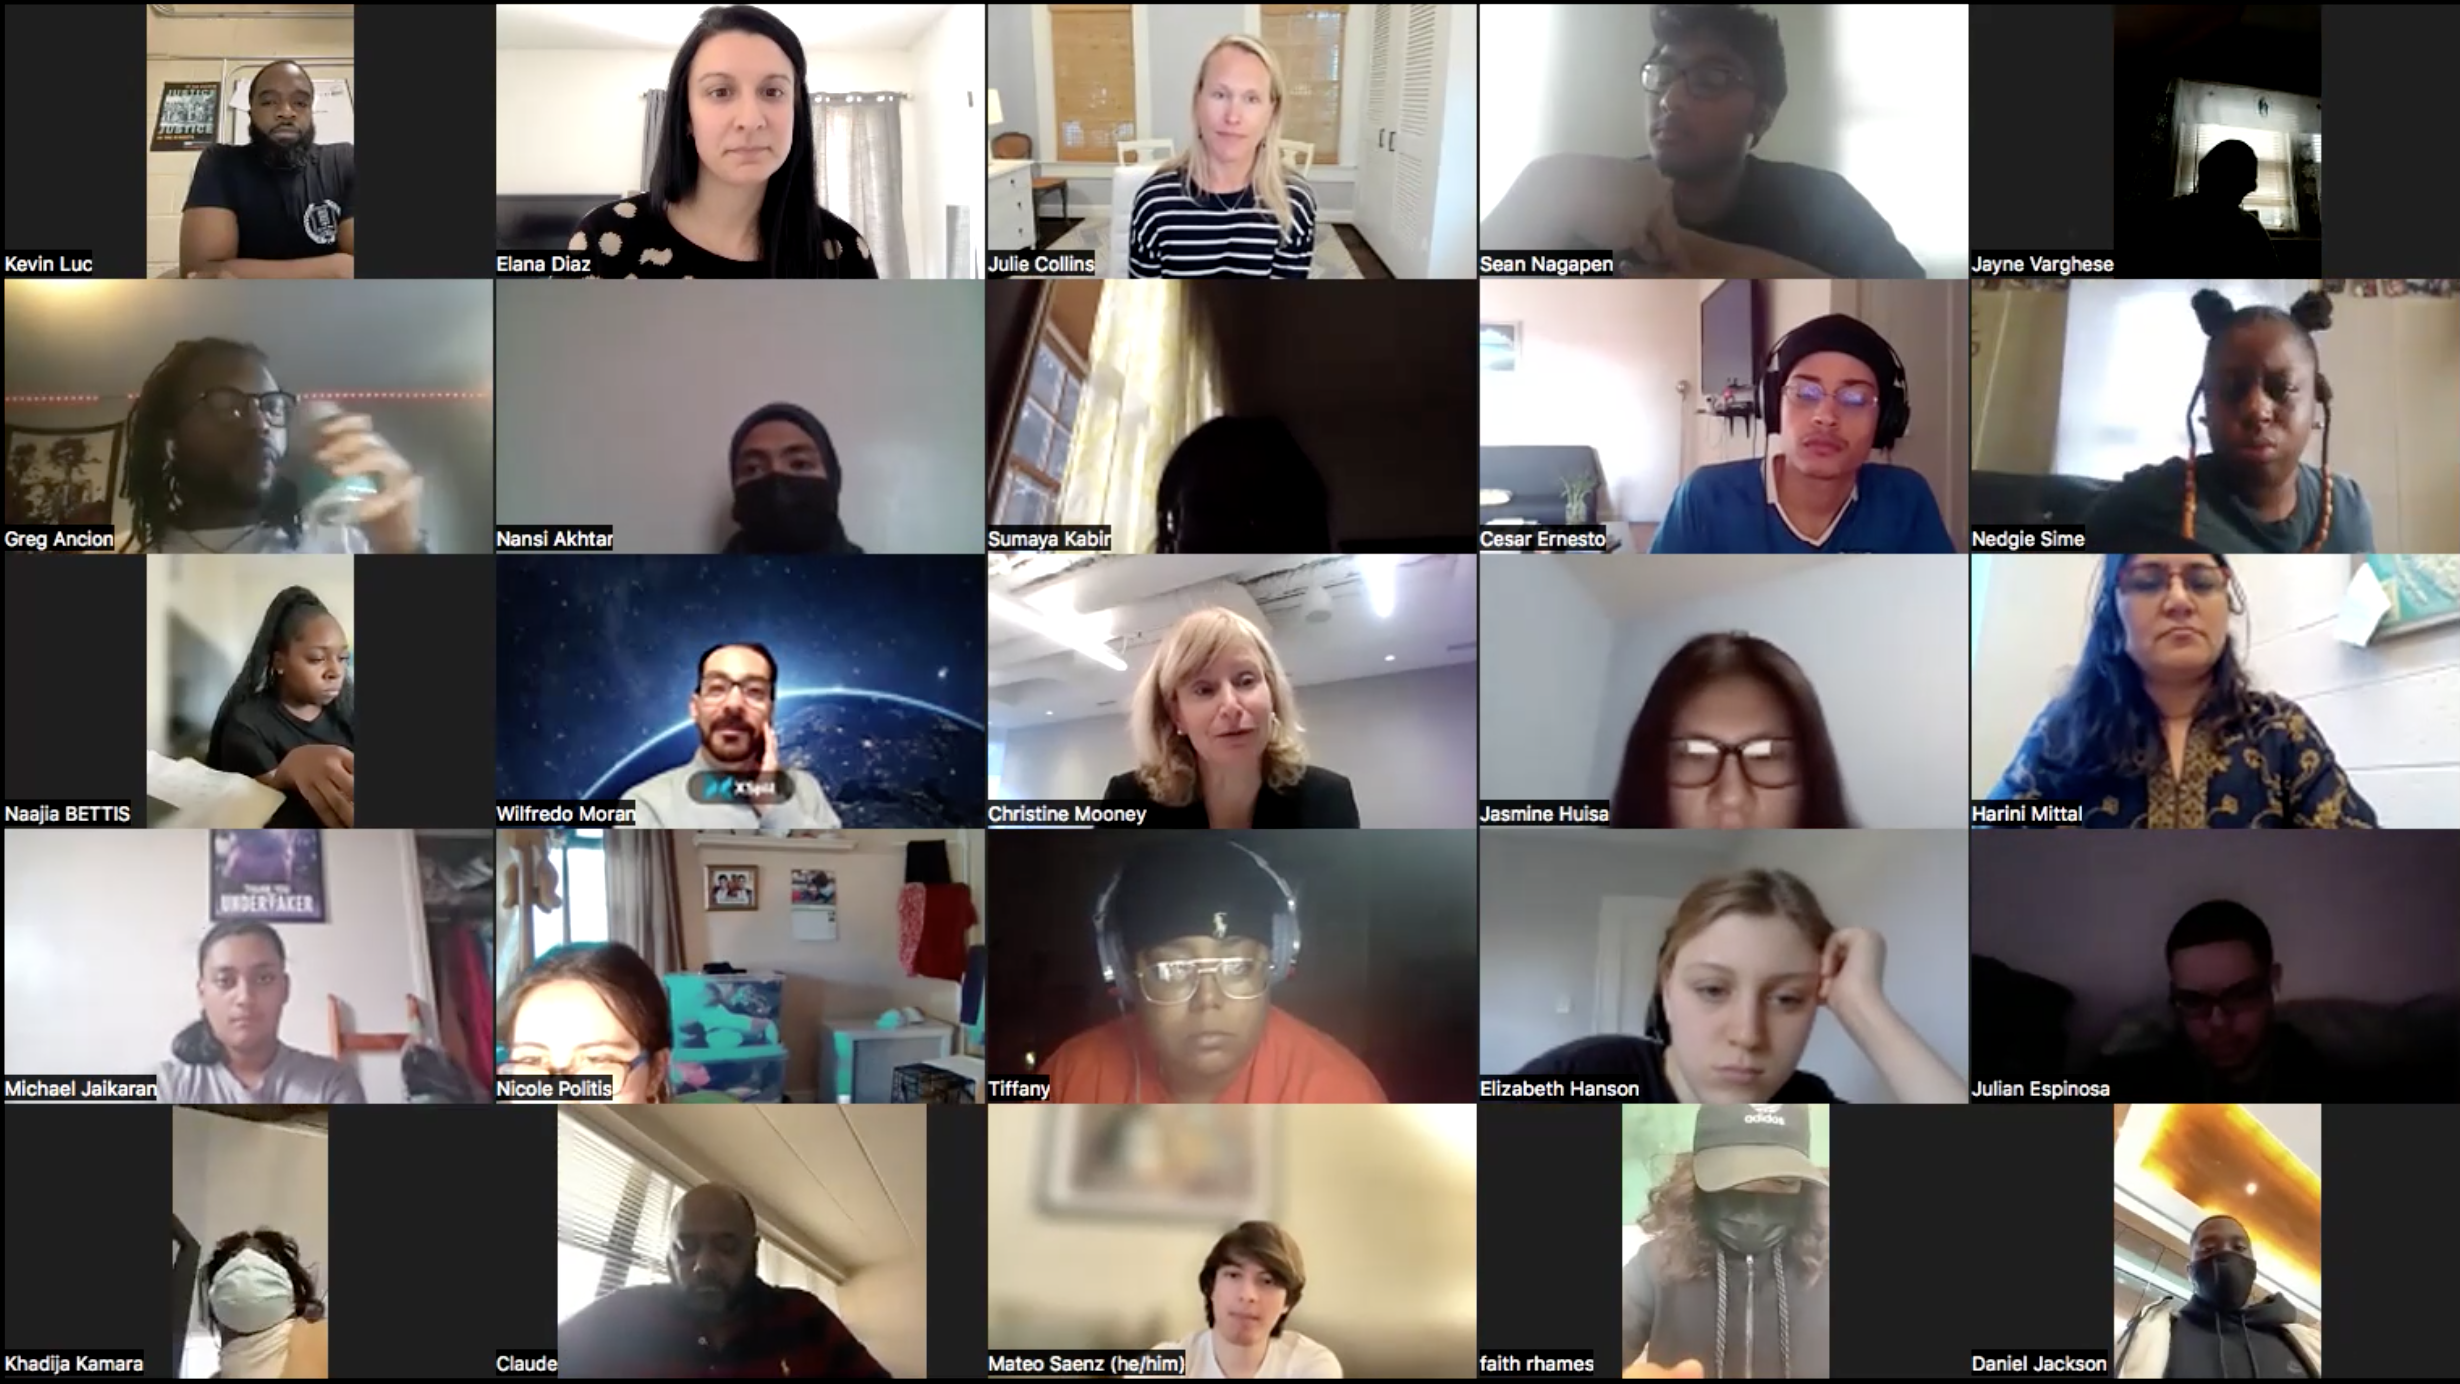 The Innovation Challenge Zoom meeting